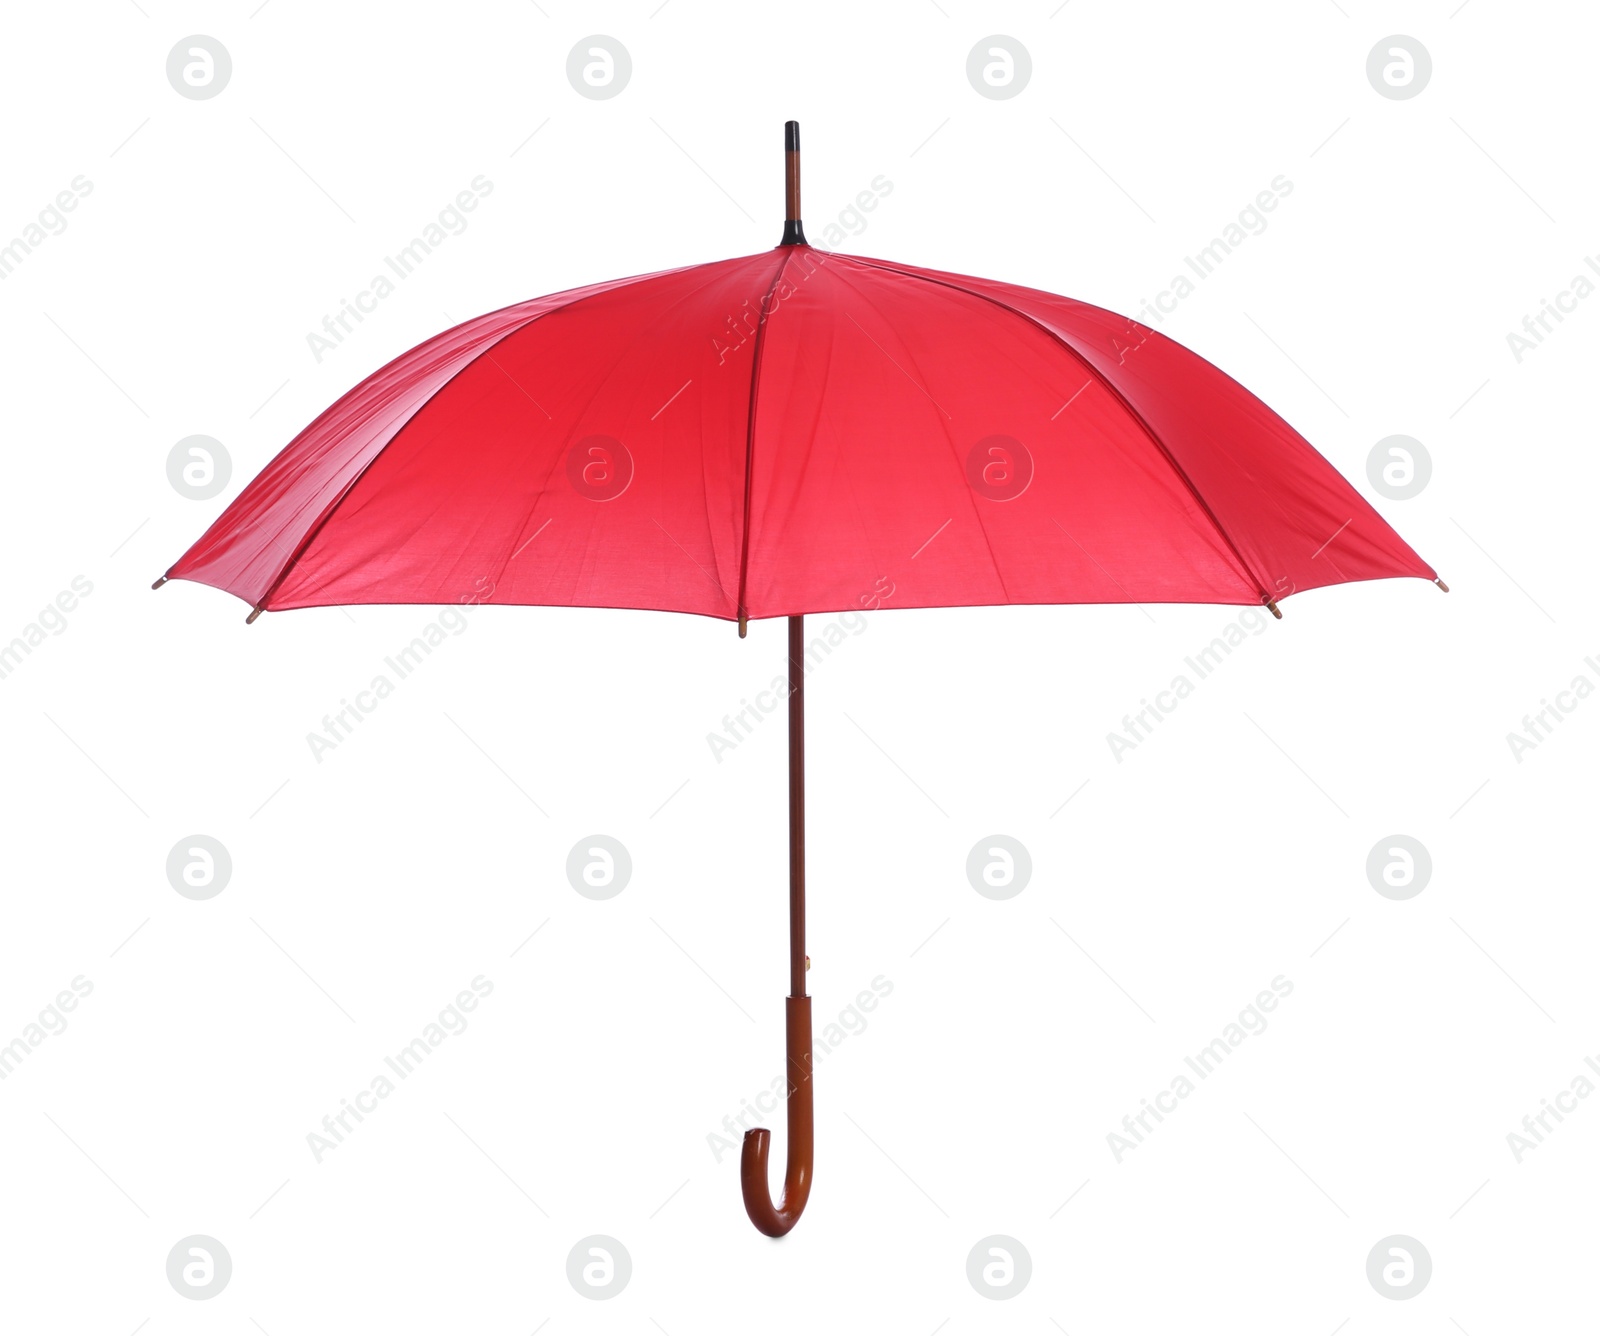 Photo of One open red umbrella isolated on white